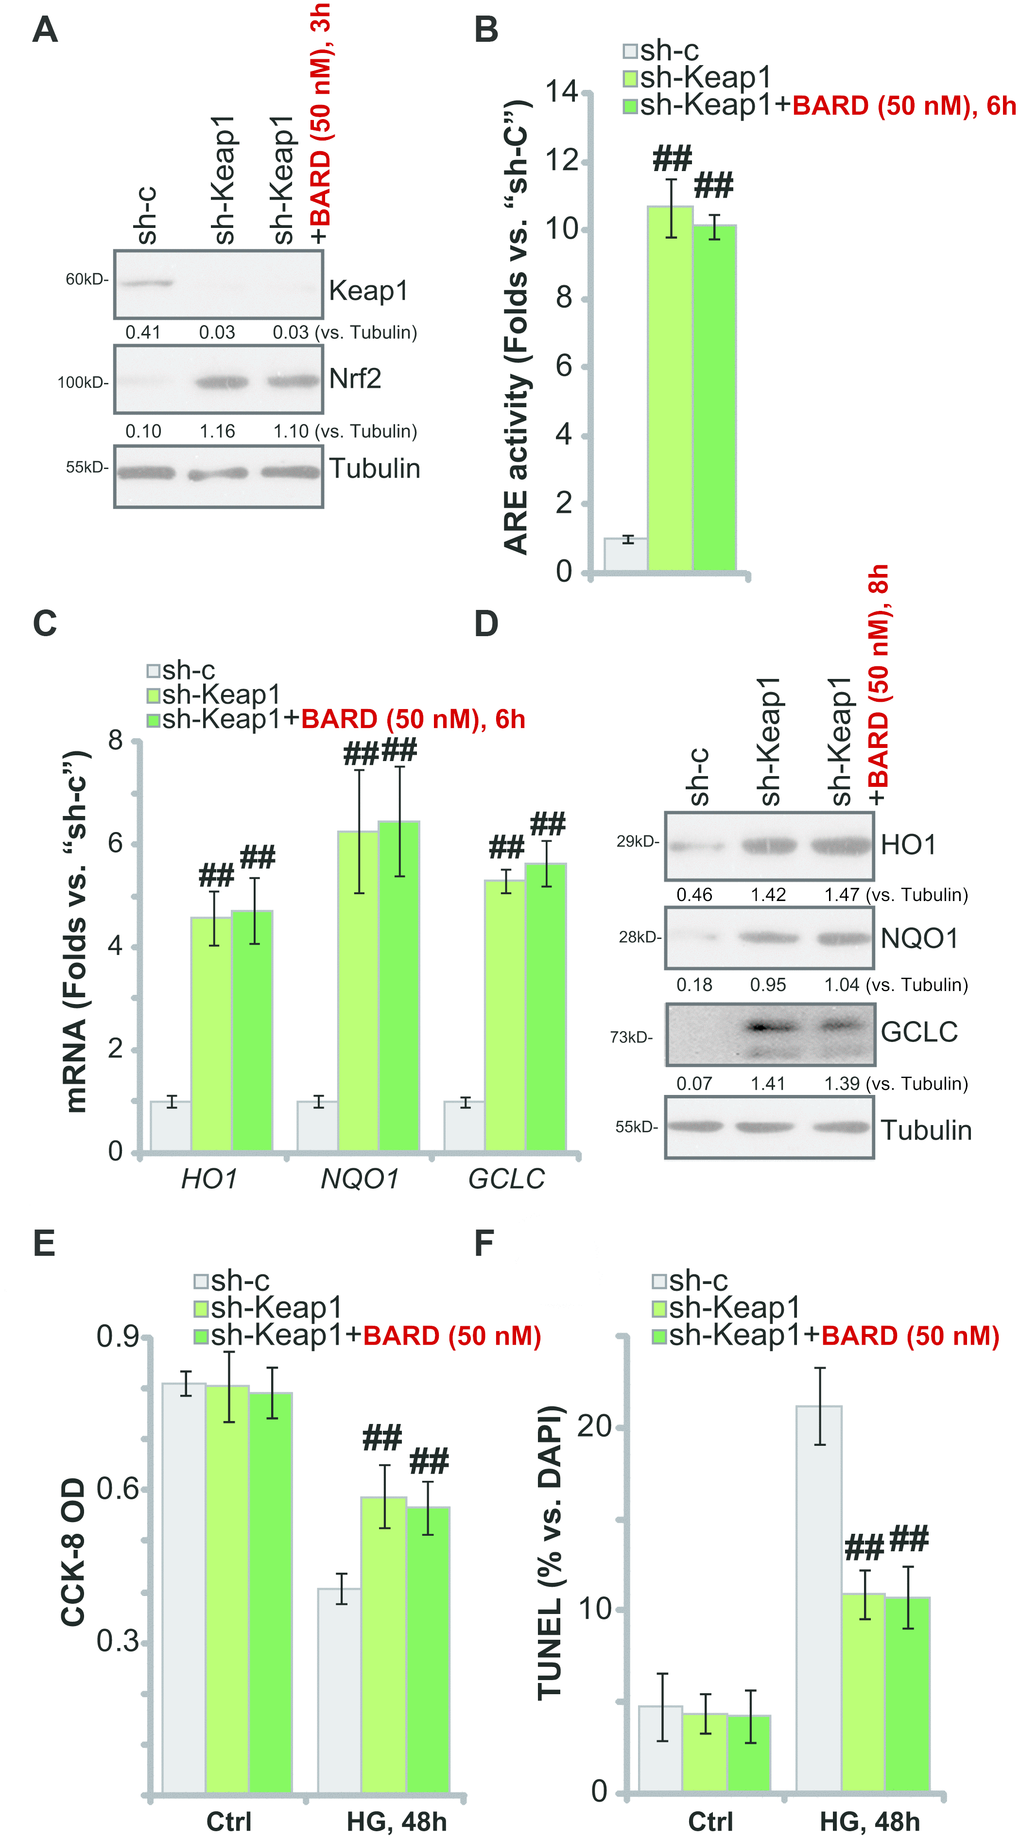 Keap1 silencing mimics BARD-induced cytoprotection in HG-stimulated HUVECs. The stable HUVECs with Keap1 shRNA lentiviral particles (“sh-Keap1”) were treated with or without Bardoxolone Methyl (BARD, at 50 nM) for applied time periods, control cells were transduced with the scramble control shRNA (“sh-C”), expression of listed genes was tested by qPCR and Western blotting analyses (A, C, D), with the relative ARE activity examined as well (B); Alternatively, cells were pretreated with BARD (50 nM) for 1h, followed by HG stimulation and cultured for 48h, cell viability (CCK-8 assay, E) and apoptosis (nuclear TUNEL staining assay, F) were tested. Expression of the listed proteins was quantified, normalizing to the indicated loading control protein (A and D). Error bars stand for mean ± standard deviation (SD, n=5). ##p